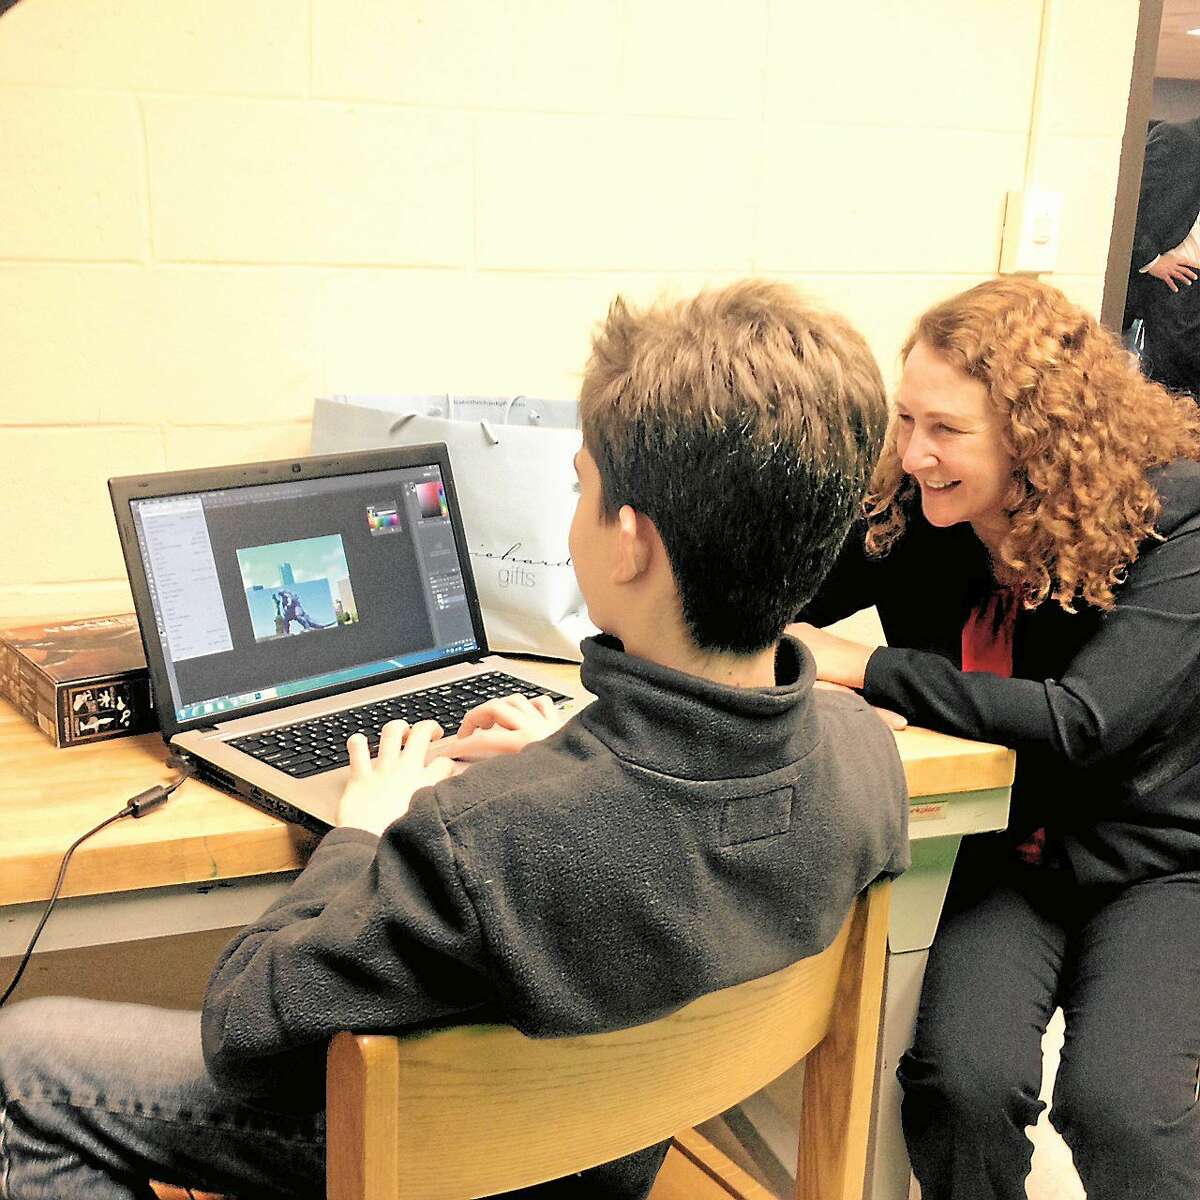 Congresswoman Elizabeth Esty toured Wamogo Regional High School’s Makerspace Wednesday to see how students at work in the innovative space.